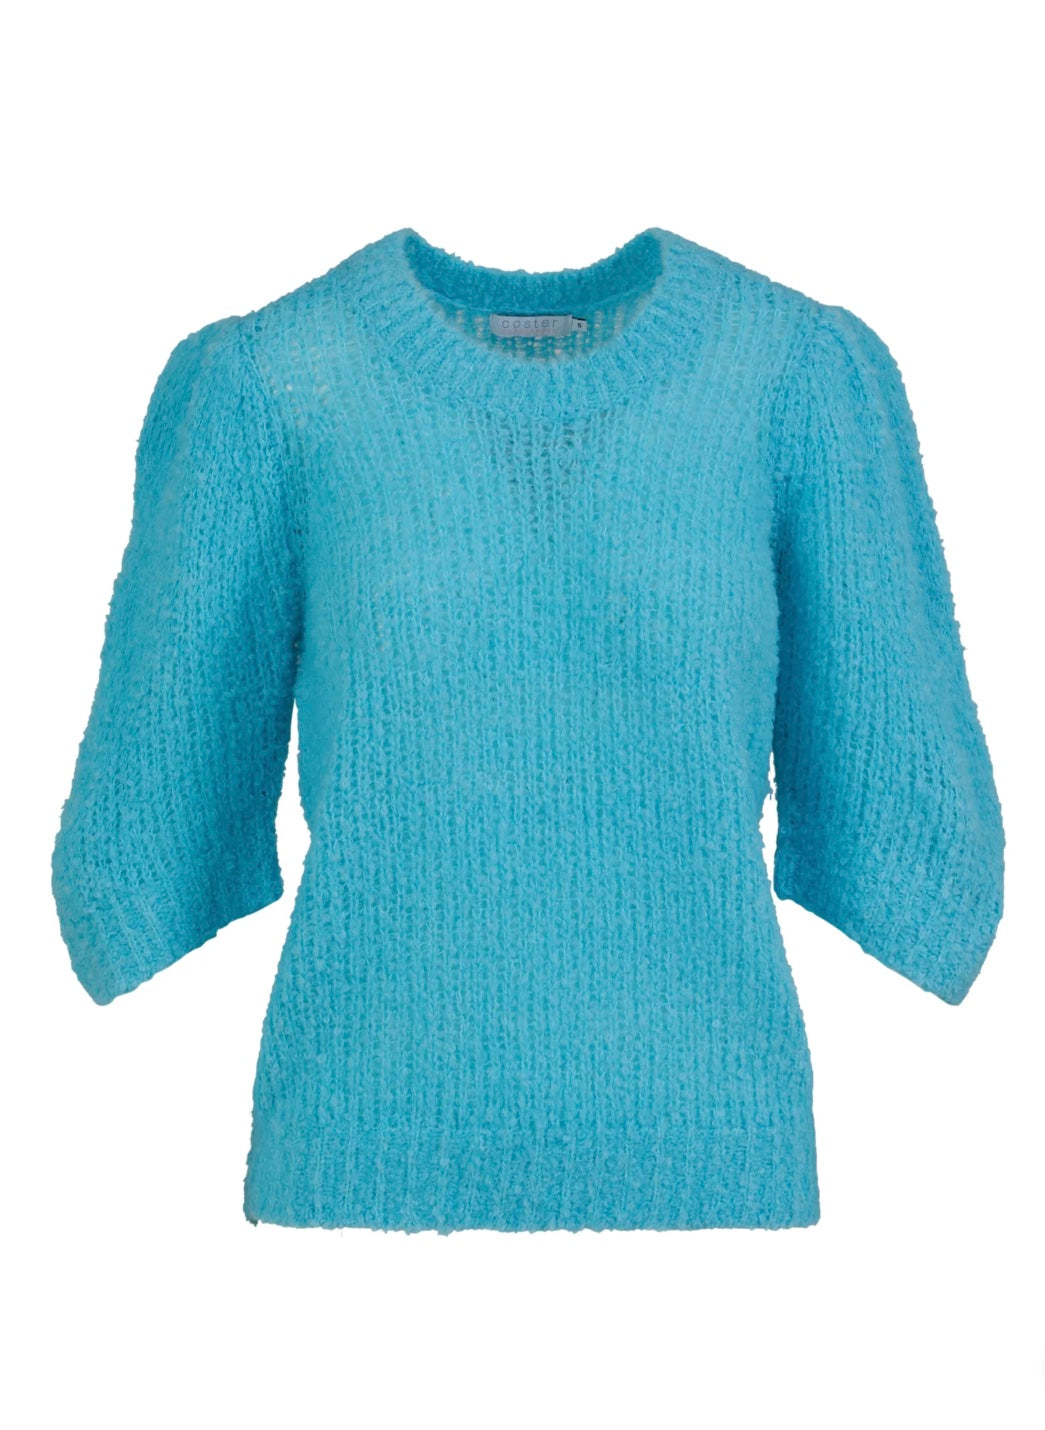 Coster Copenhagen Knit with Puff Sleeves in Boucle Aqua Blue